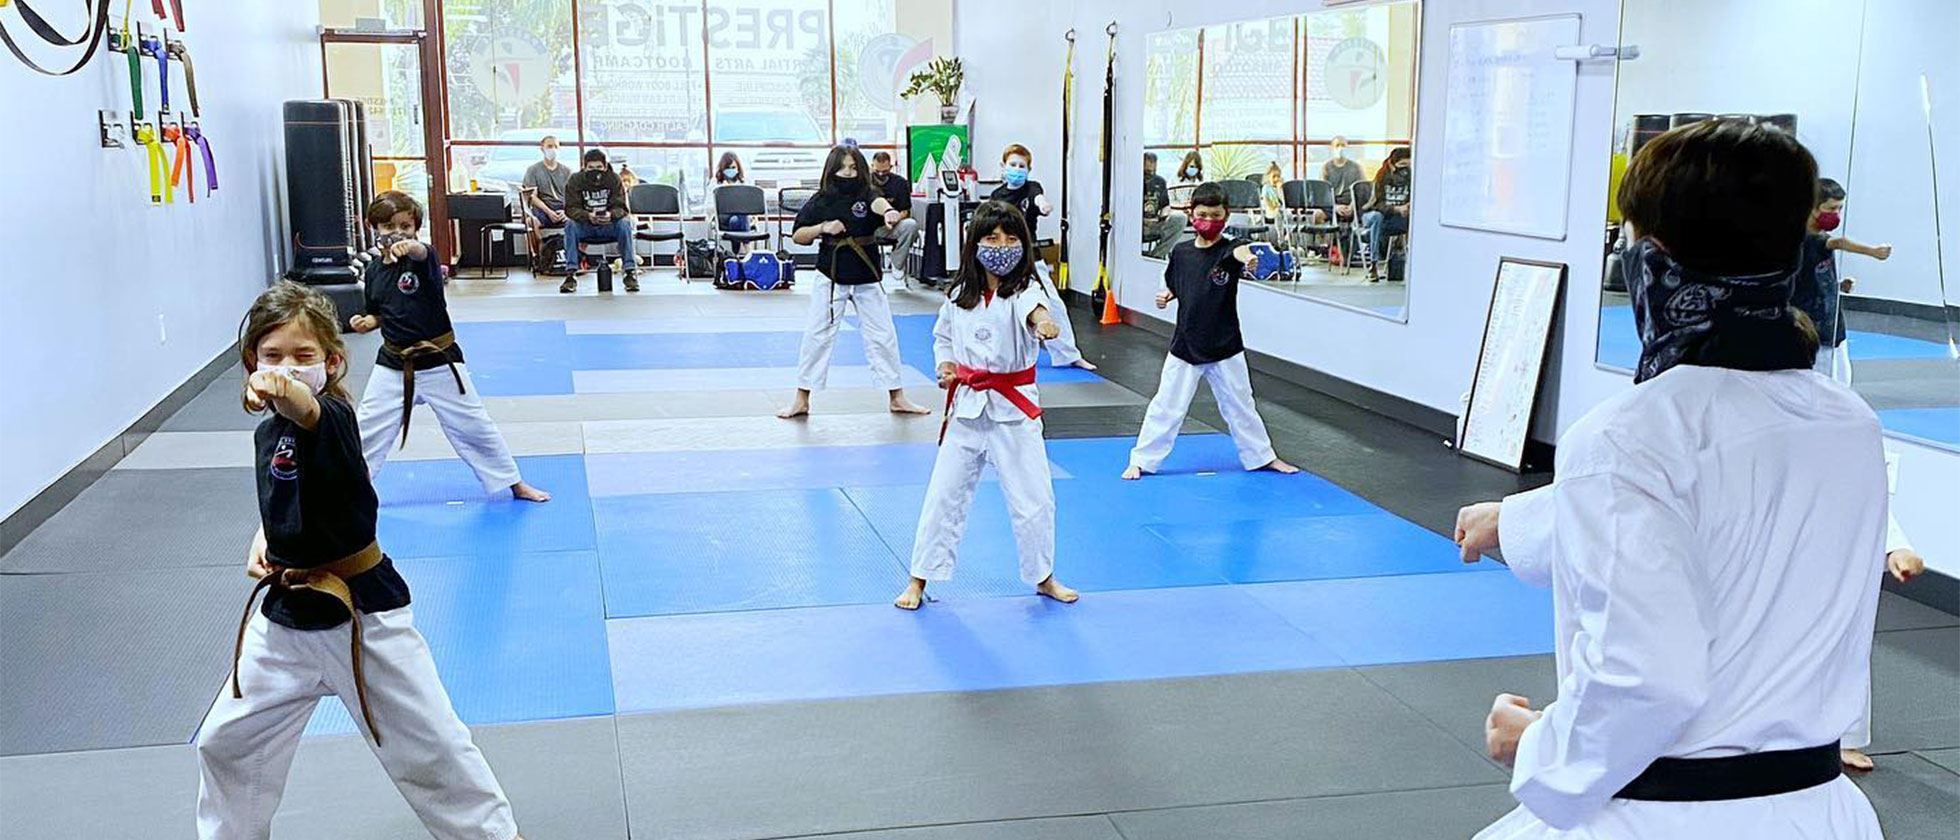 Kids Martial Arts In Whittier, California for 6-12 Year Olds